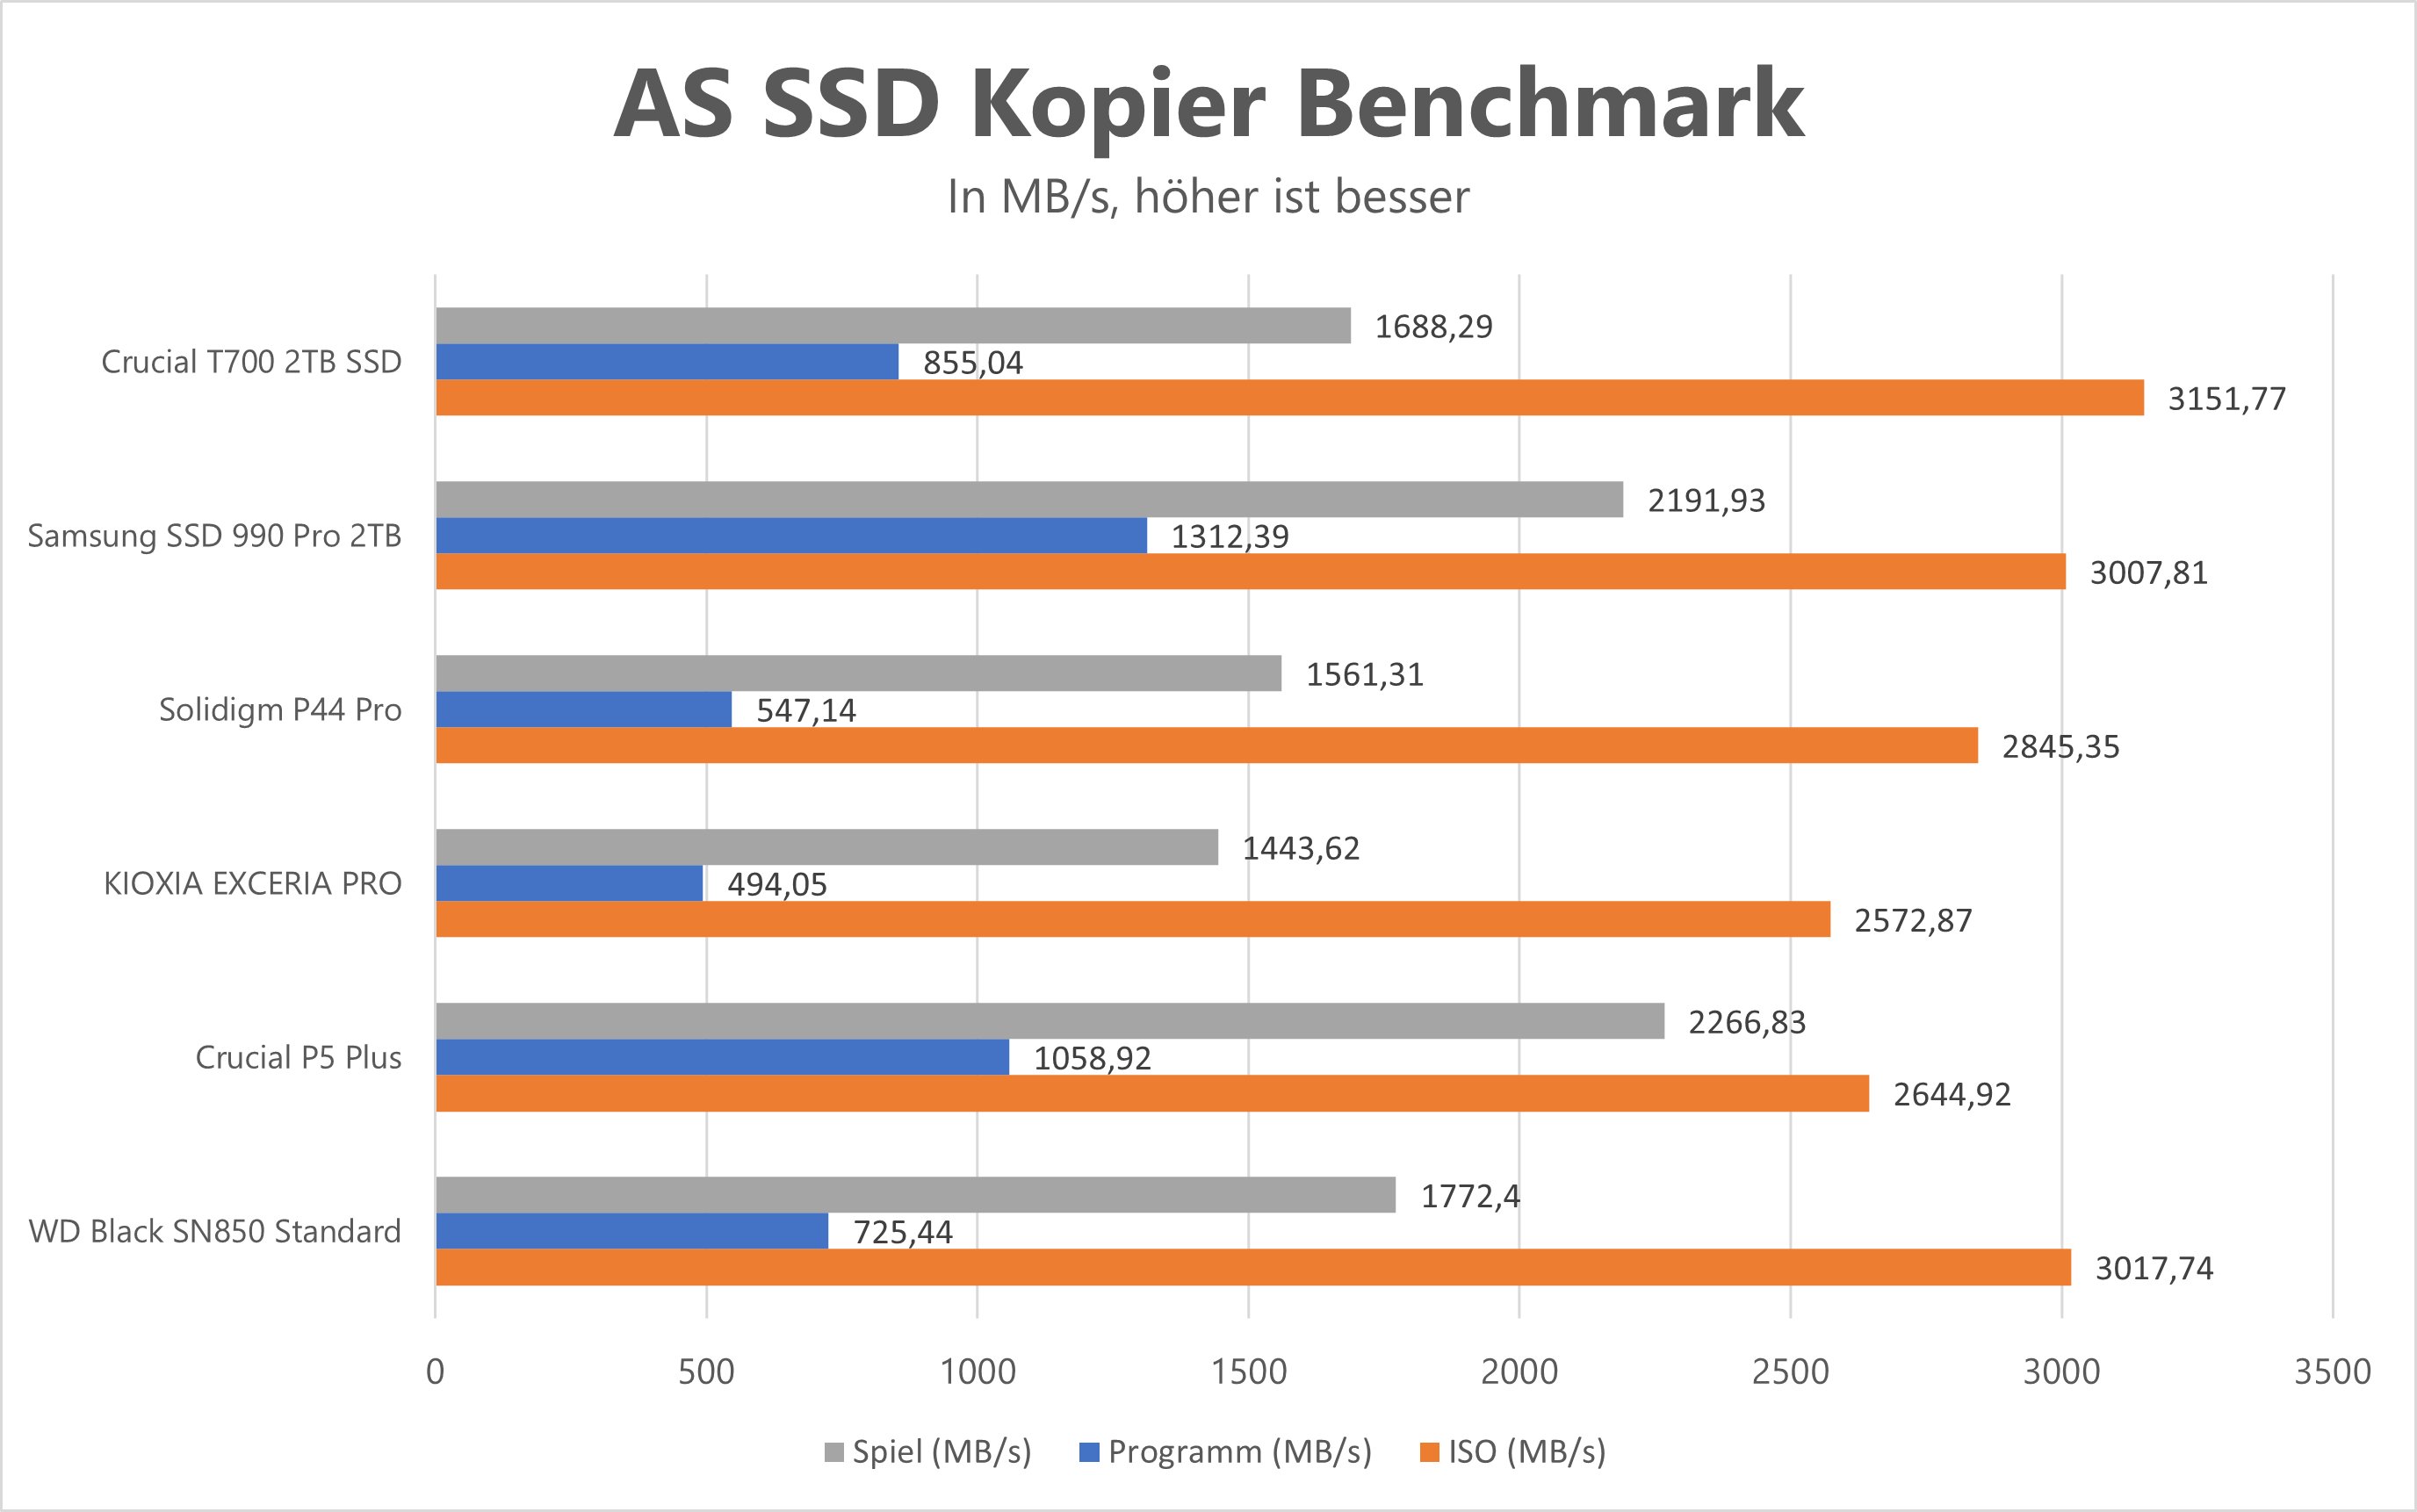 Crucial T700 AS SSD Copy Benchmark